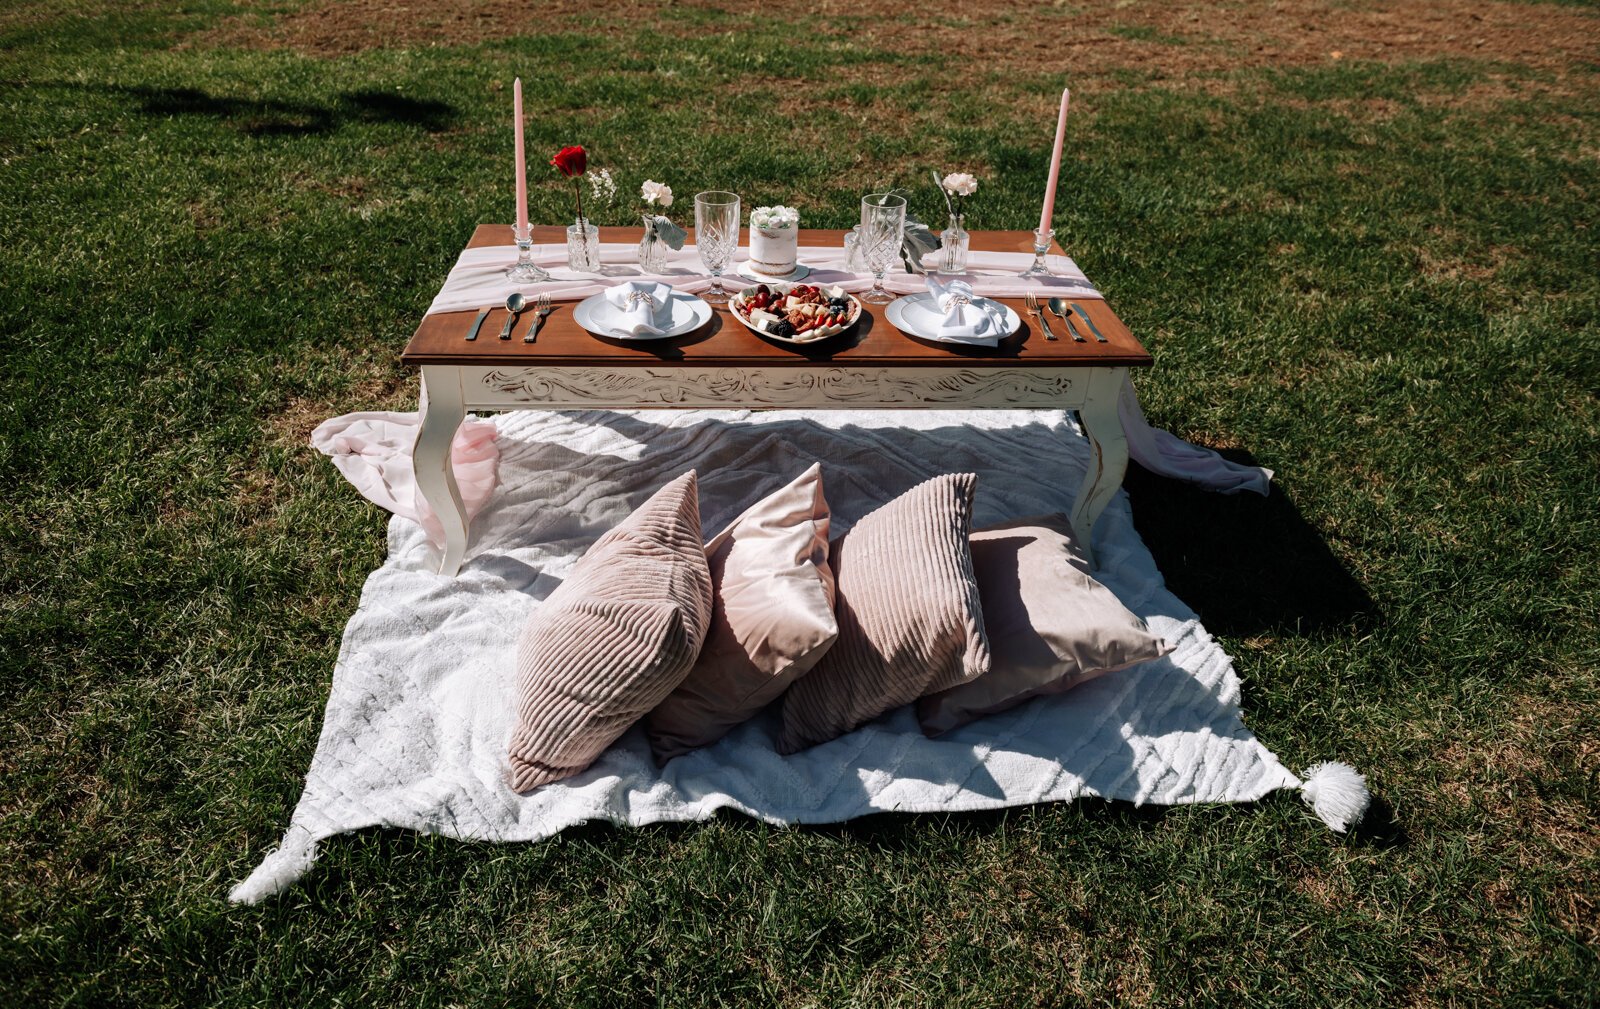 A picnic set up by Samantha Cazares, owner of Simply Charming.